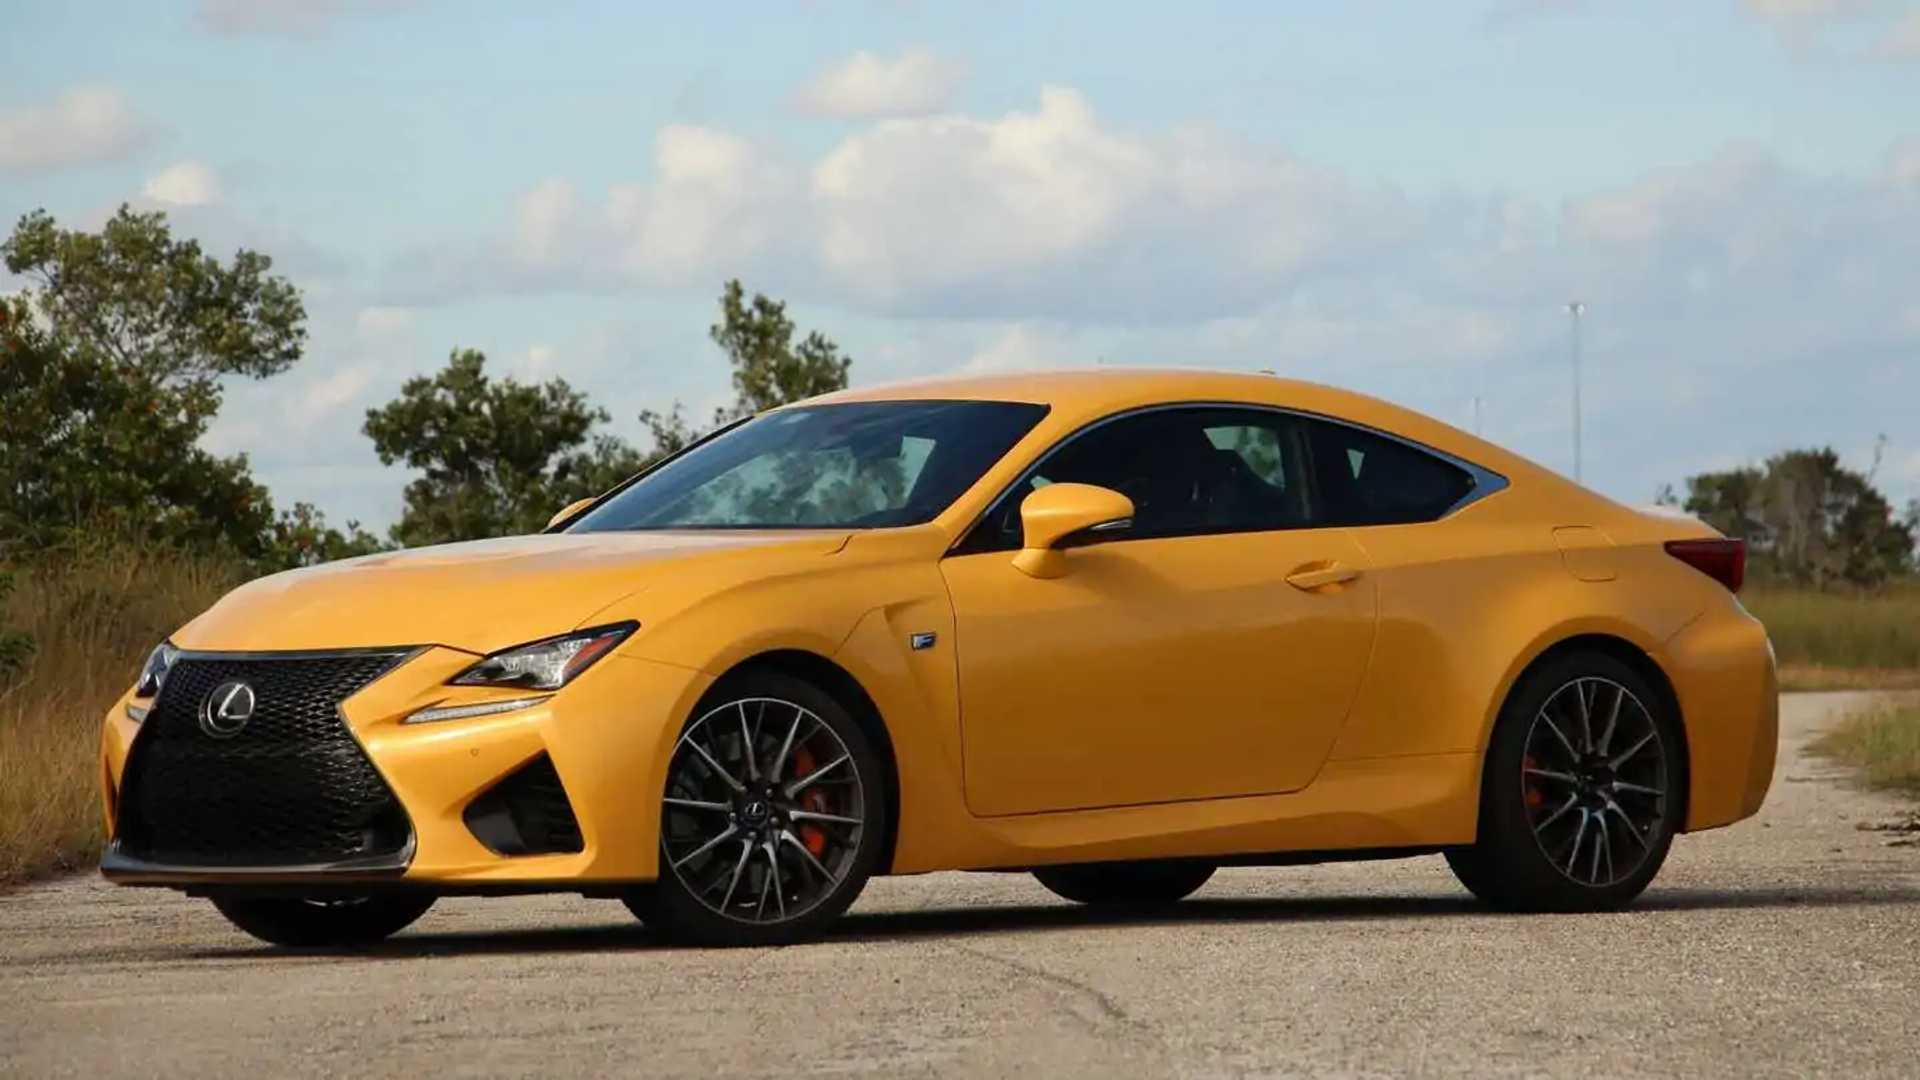 2018 Lexus RC F: Pros And Cons